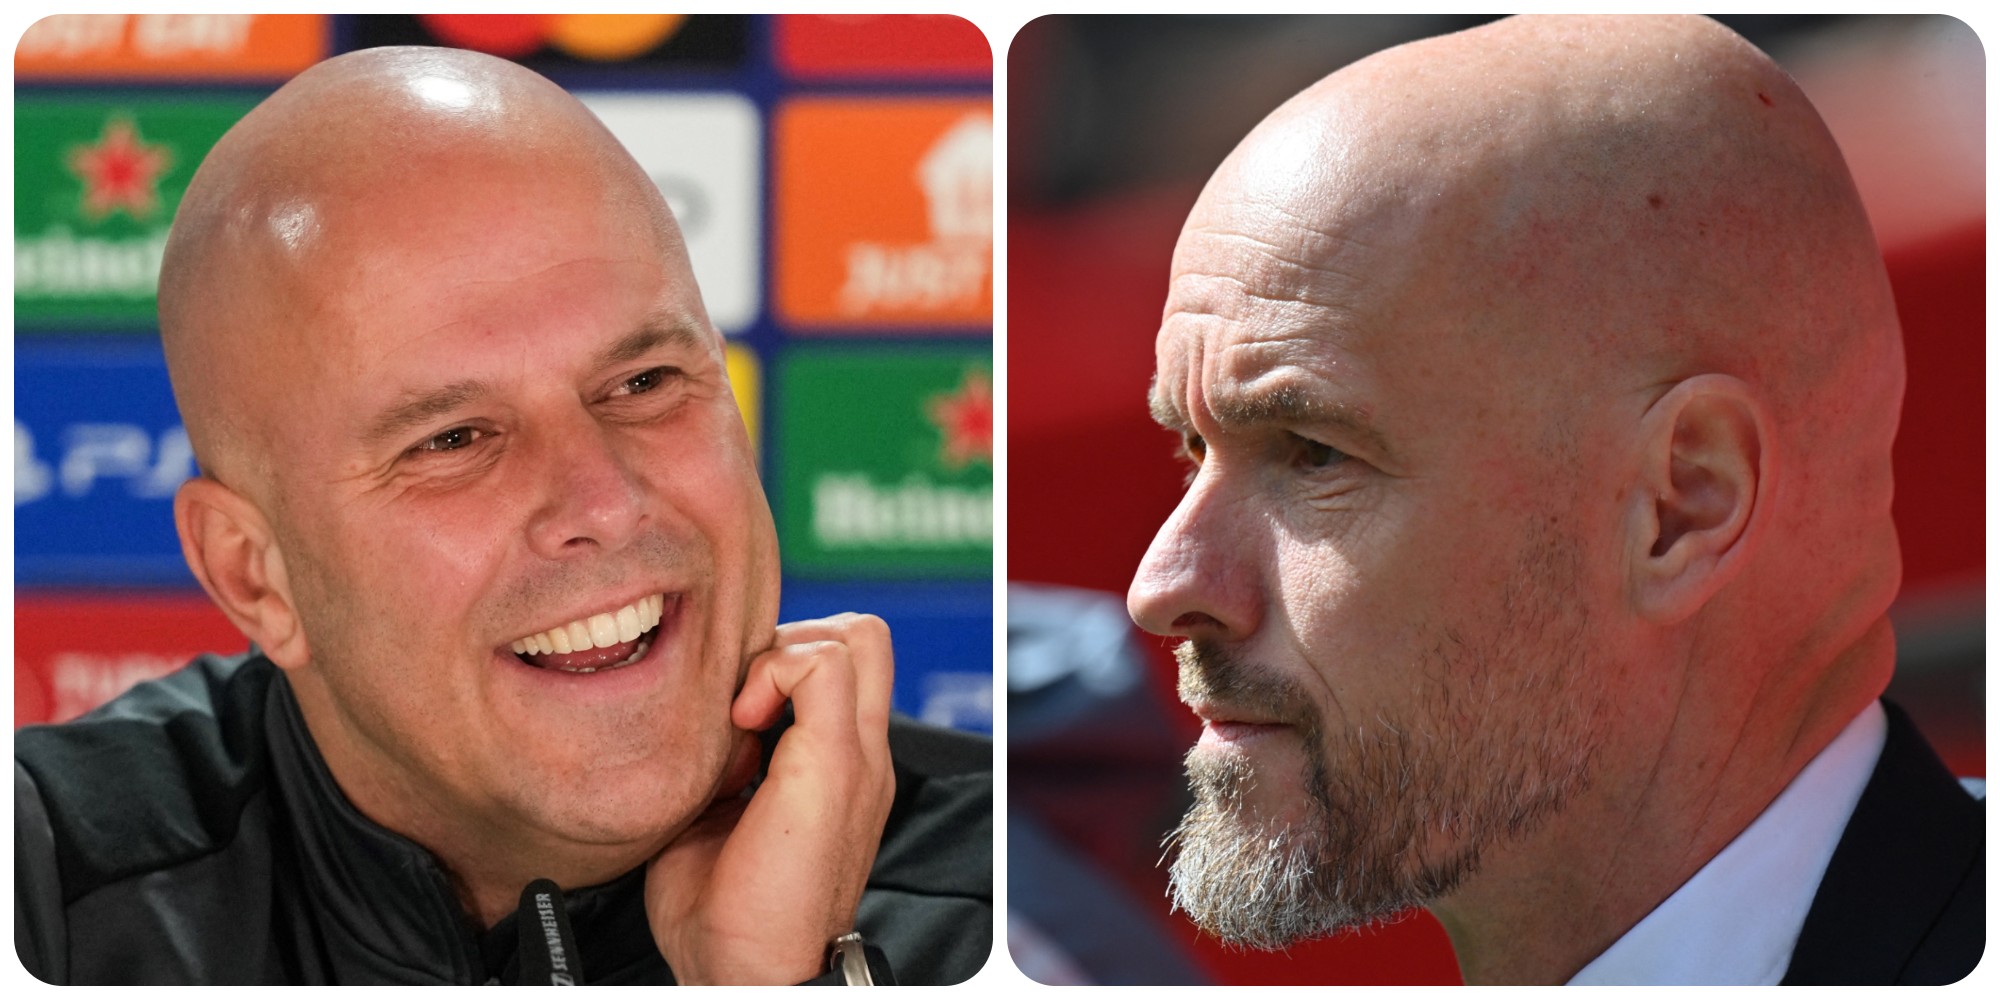 Liverpool fans will take the greatest pleasure in what Erik ten Hag has said about Arne Slot